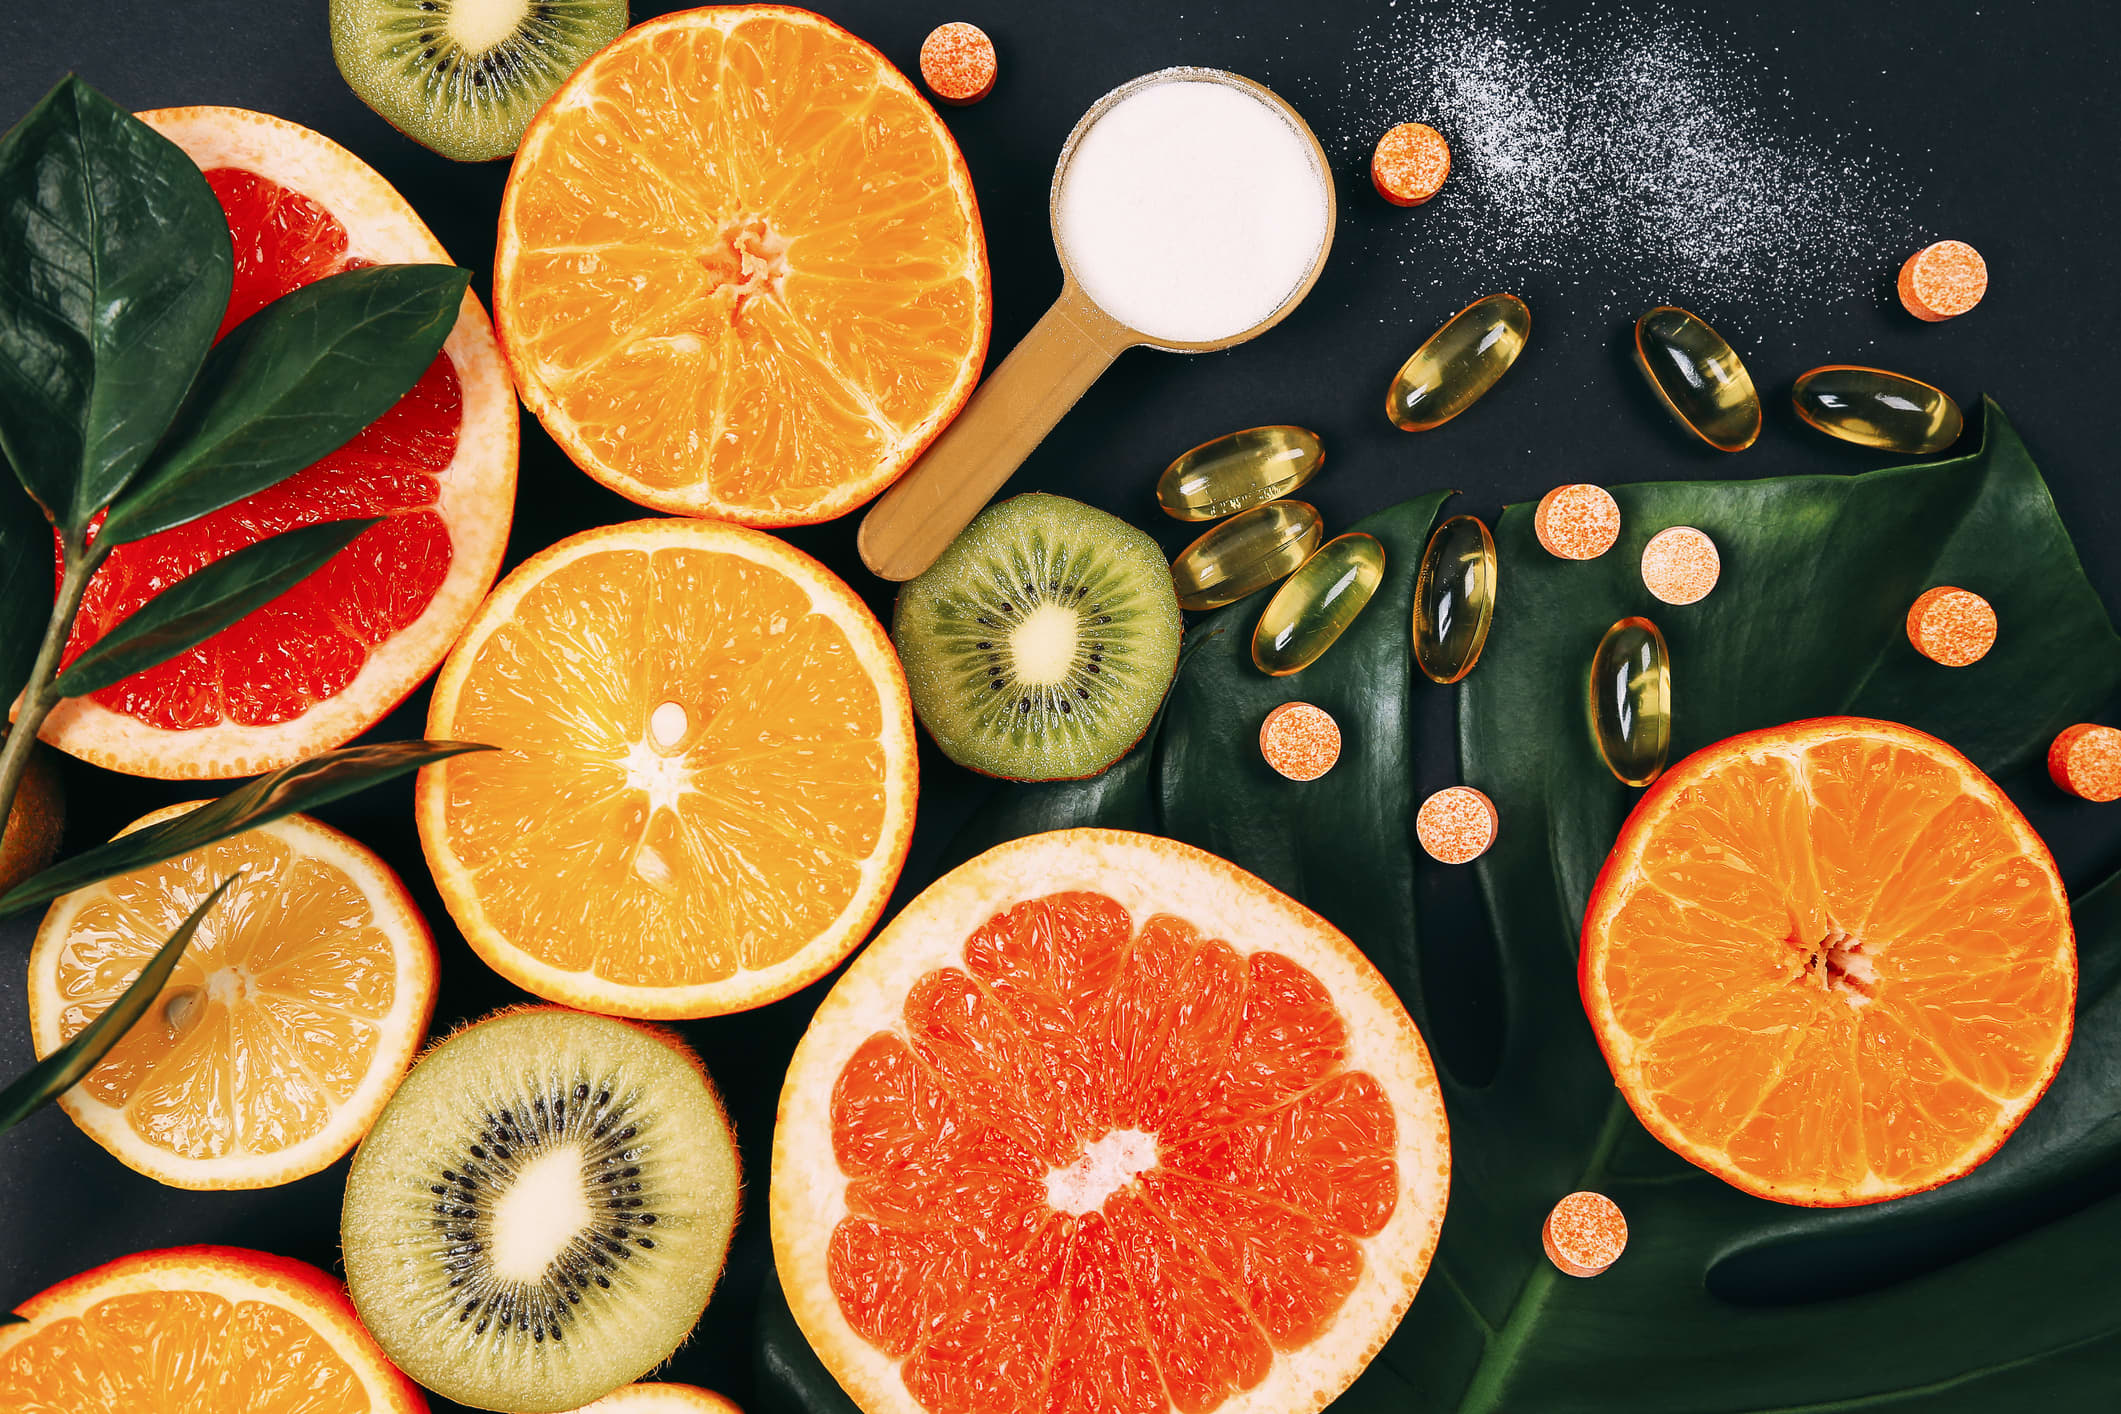 5 tried-and-true ways to boost your immune system